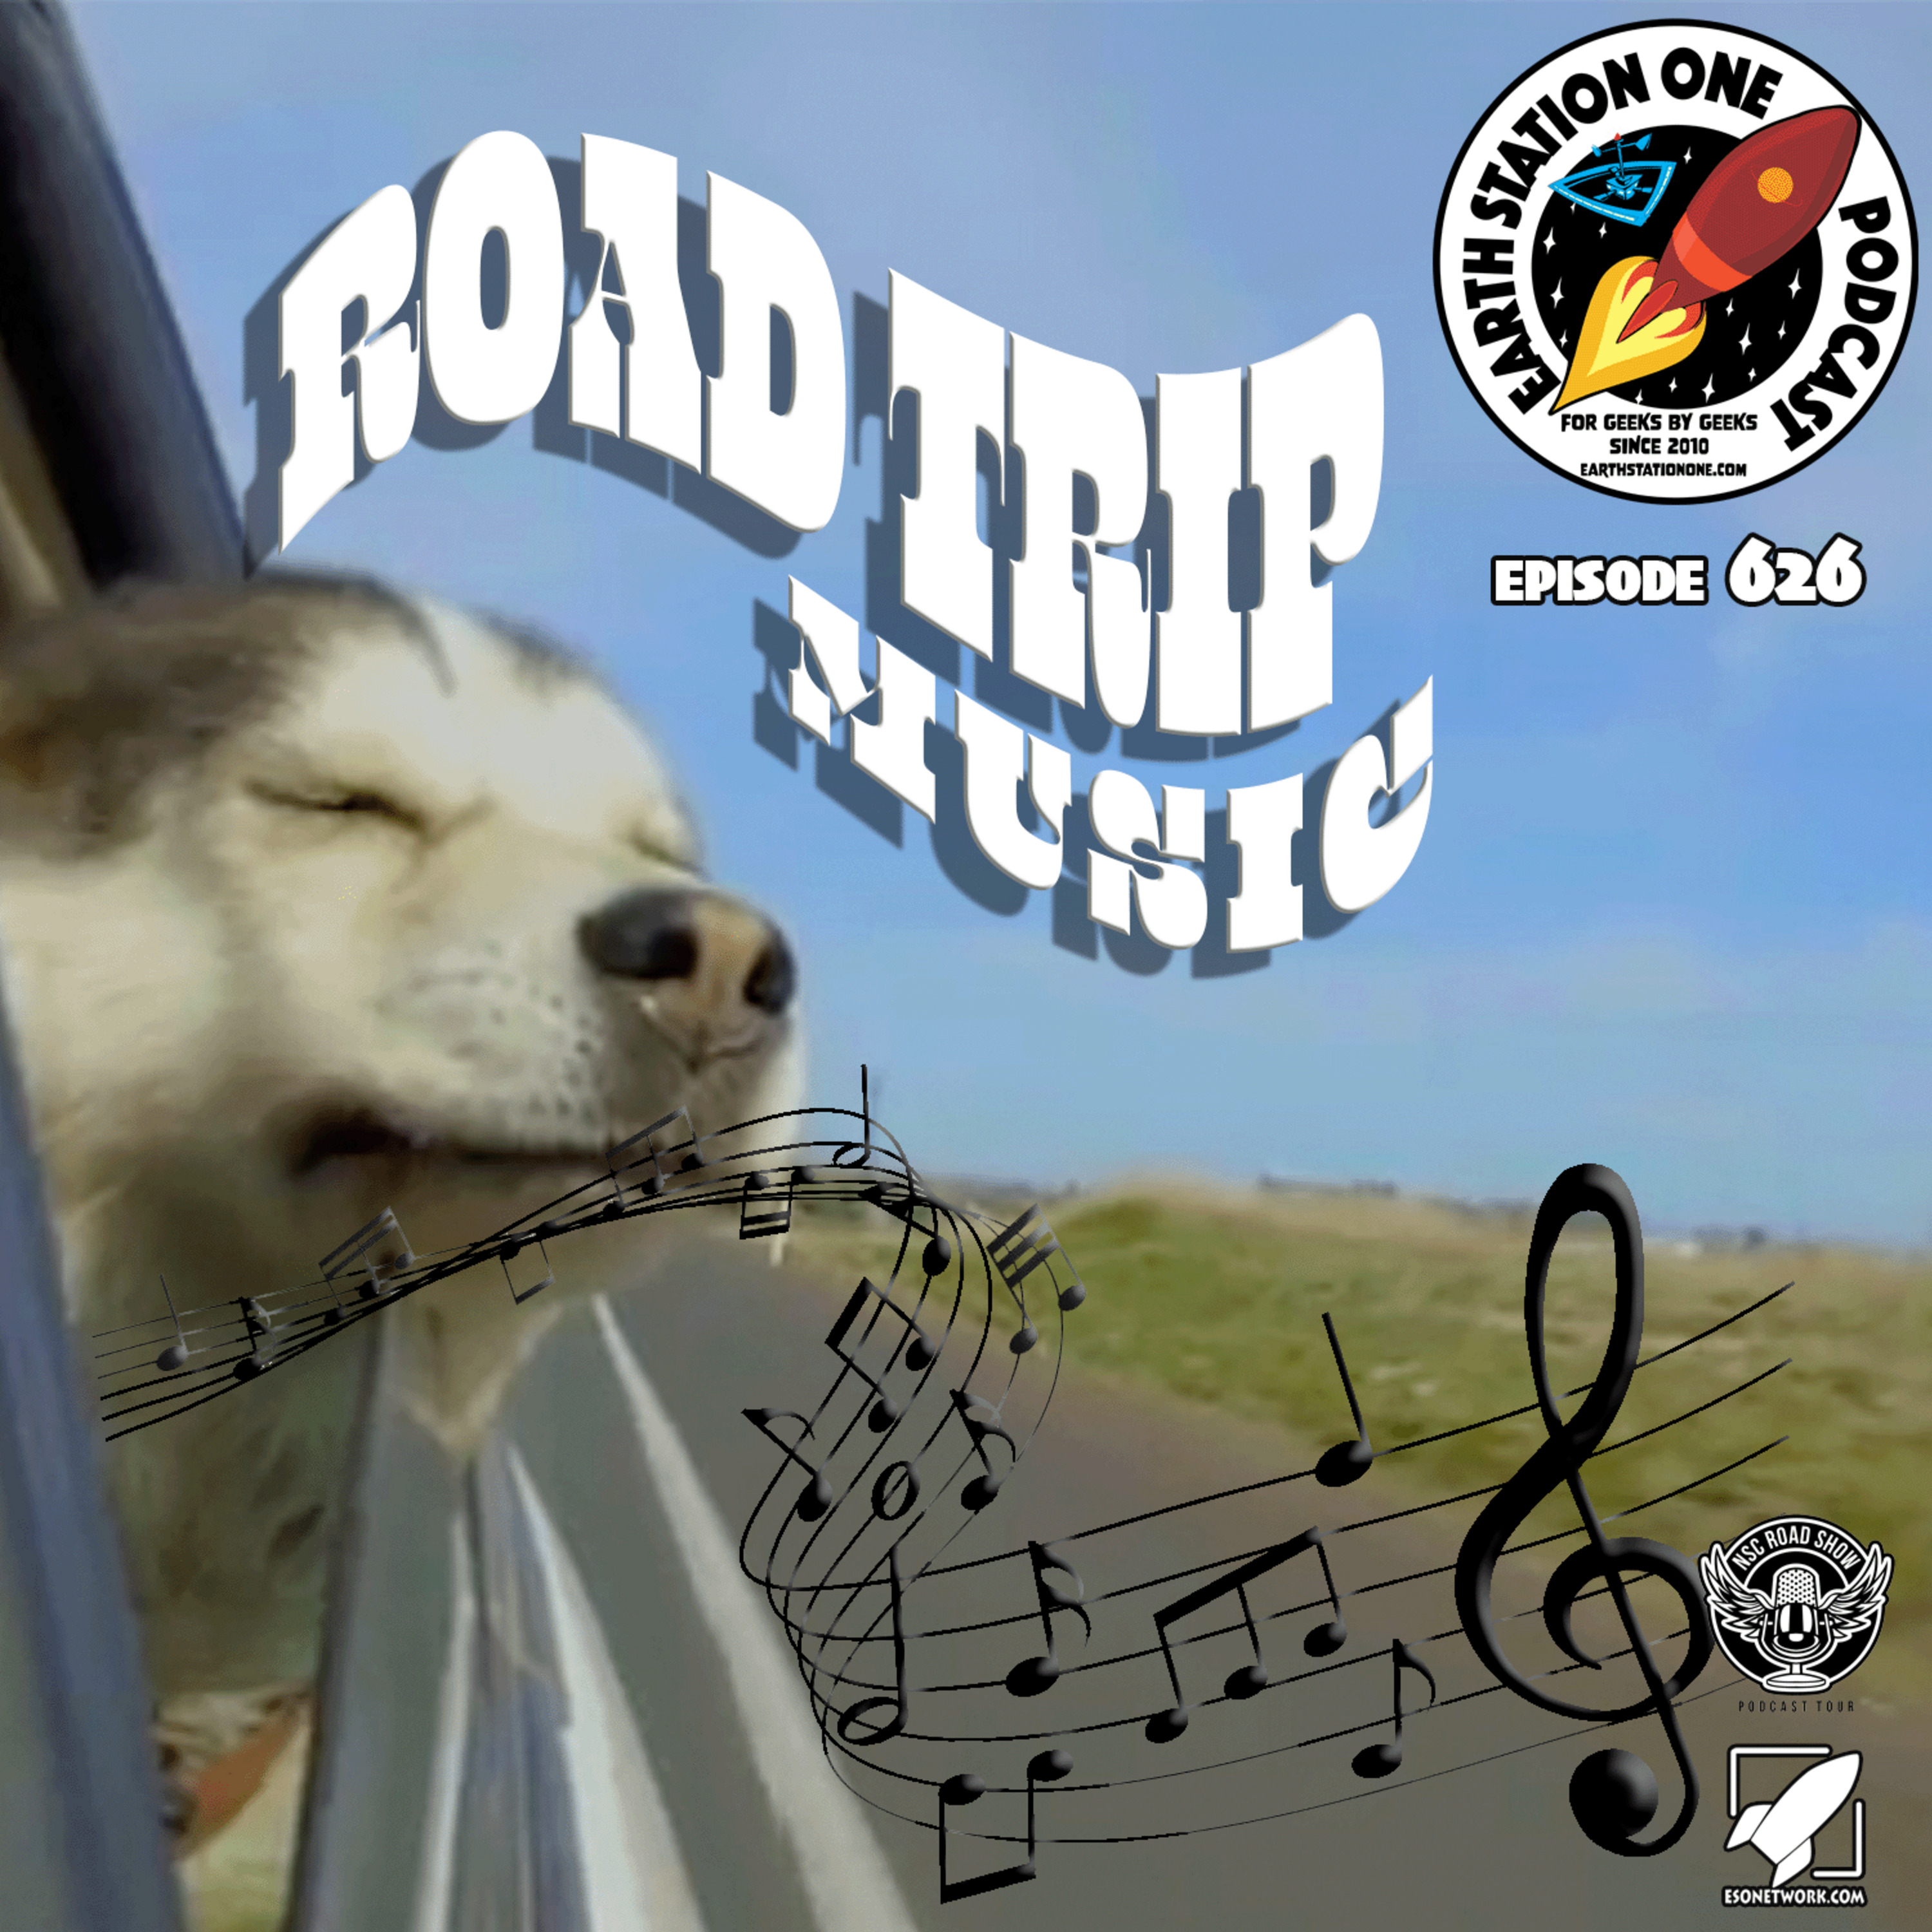 The Earth Station One Podcast - Our Favorite Road Trip Music